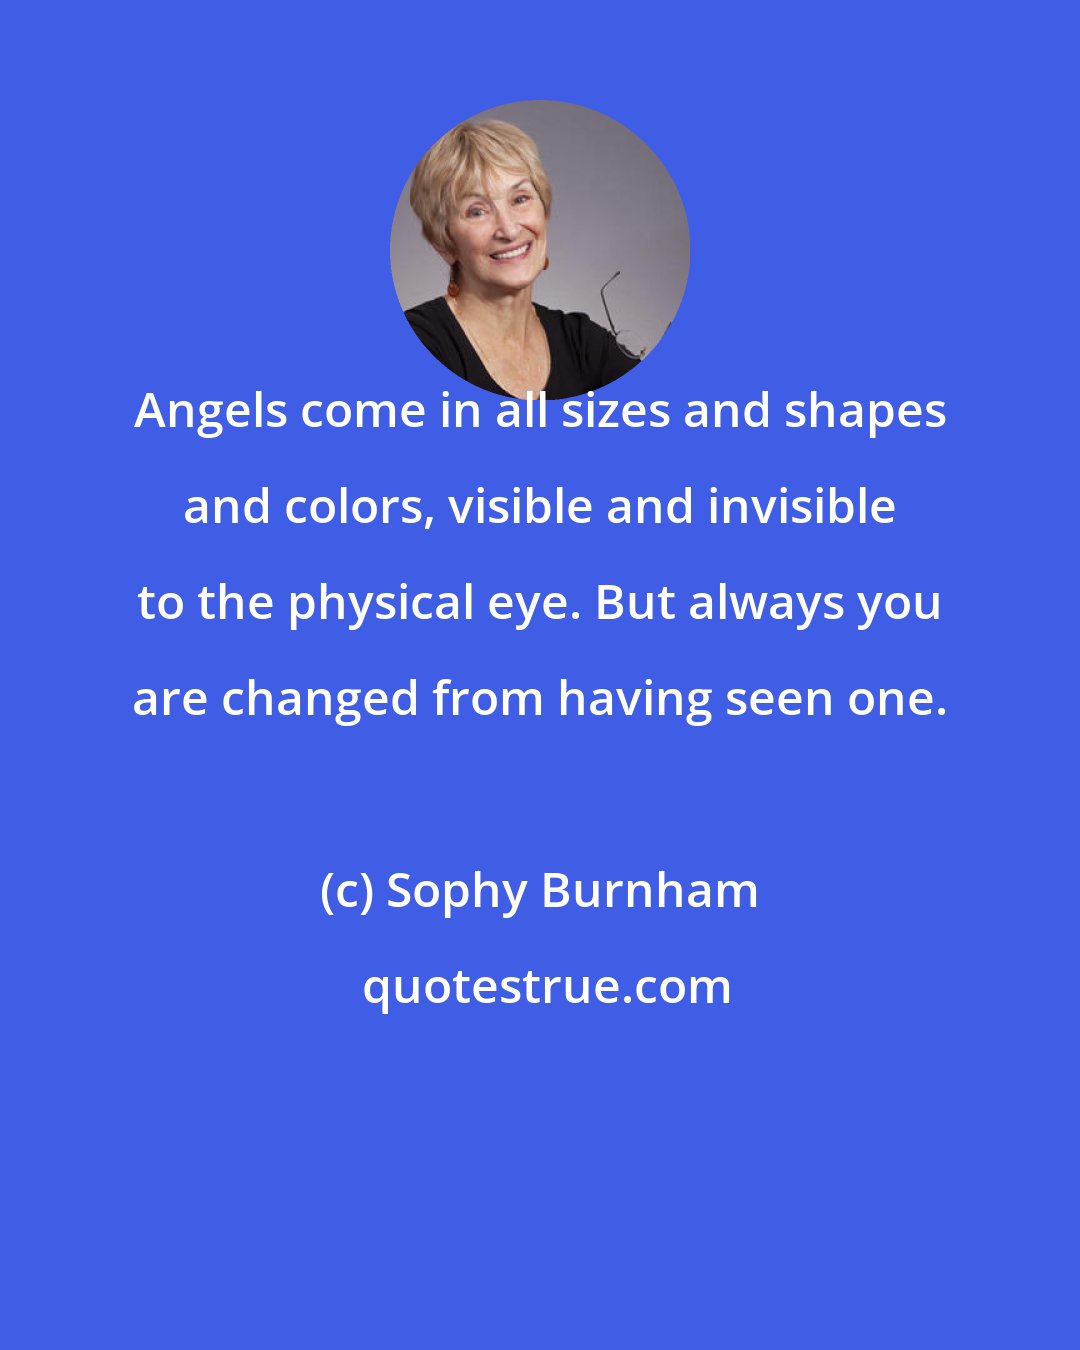 Sophy Burnham: Angels come in all sizes and shapes and colors, visible and invisible to the physical eye. But always you are changed from having seen one.